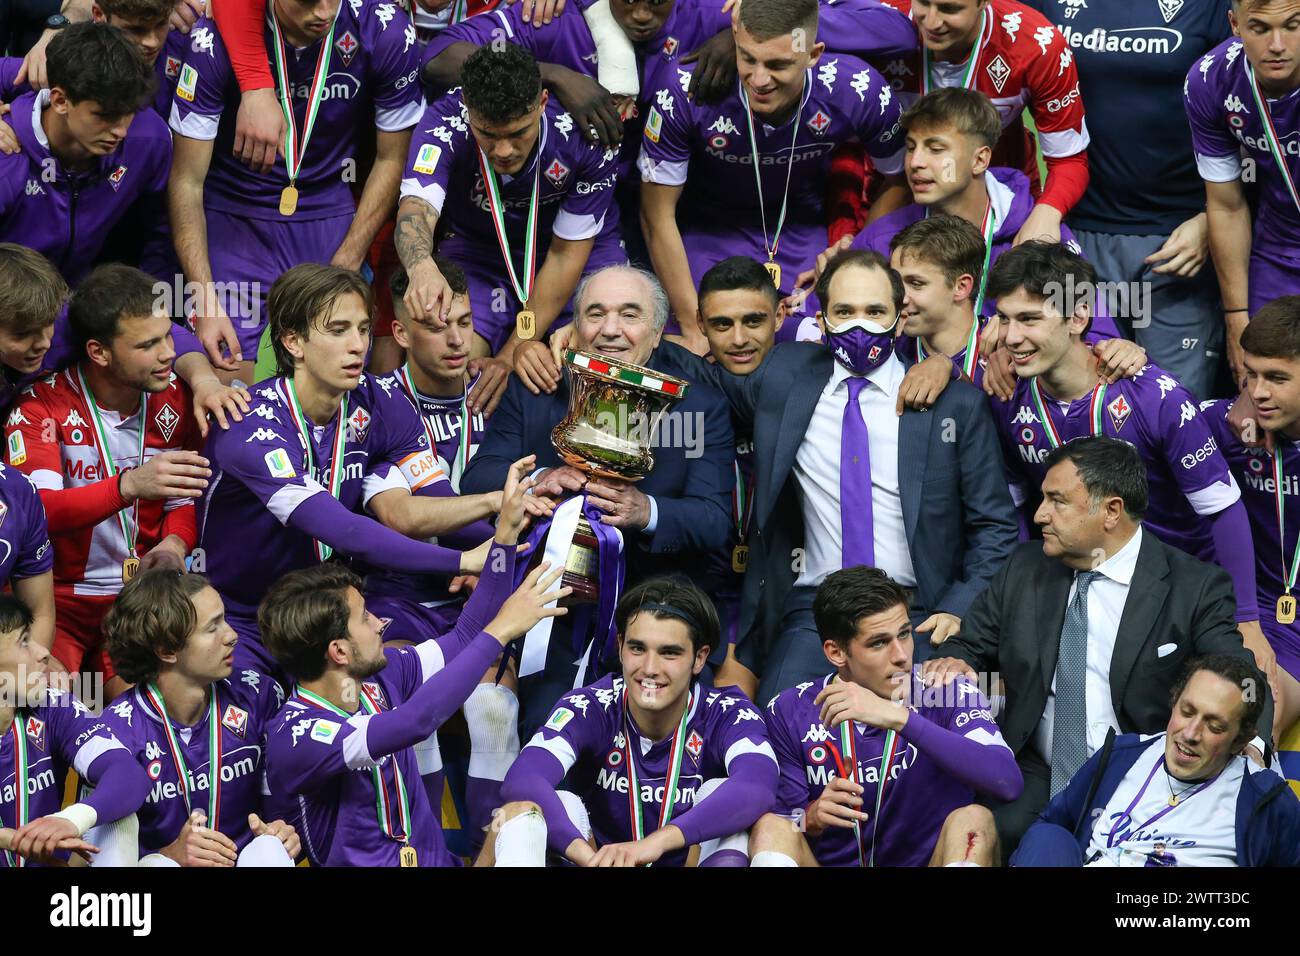 PHOTO REPERTORY - Parma, Italy, 28th April 2021. Rocco B Comisso Chairman of ACF Fiorentina, Joseph B Comisso and Joe Barone ACF Fiorentina Managing Director celebrate with the players and the trophy following the 2-1 victory in the Primavera Coppa Italia match at Stadio Ennio Tardini, Parma. Picture credit should read: Jonathan Moscrop/Sportimage via PA Images (Parma - 2021-04-28, Jonathan Moscrop/ipa-agency.net) ps the photo can be used respecting the context in which it was taken, and without intent defamatory of the decorum of the people represented Editorial Usage Only Stock Photo